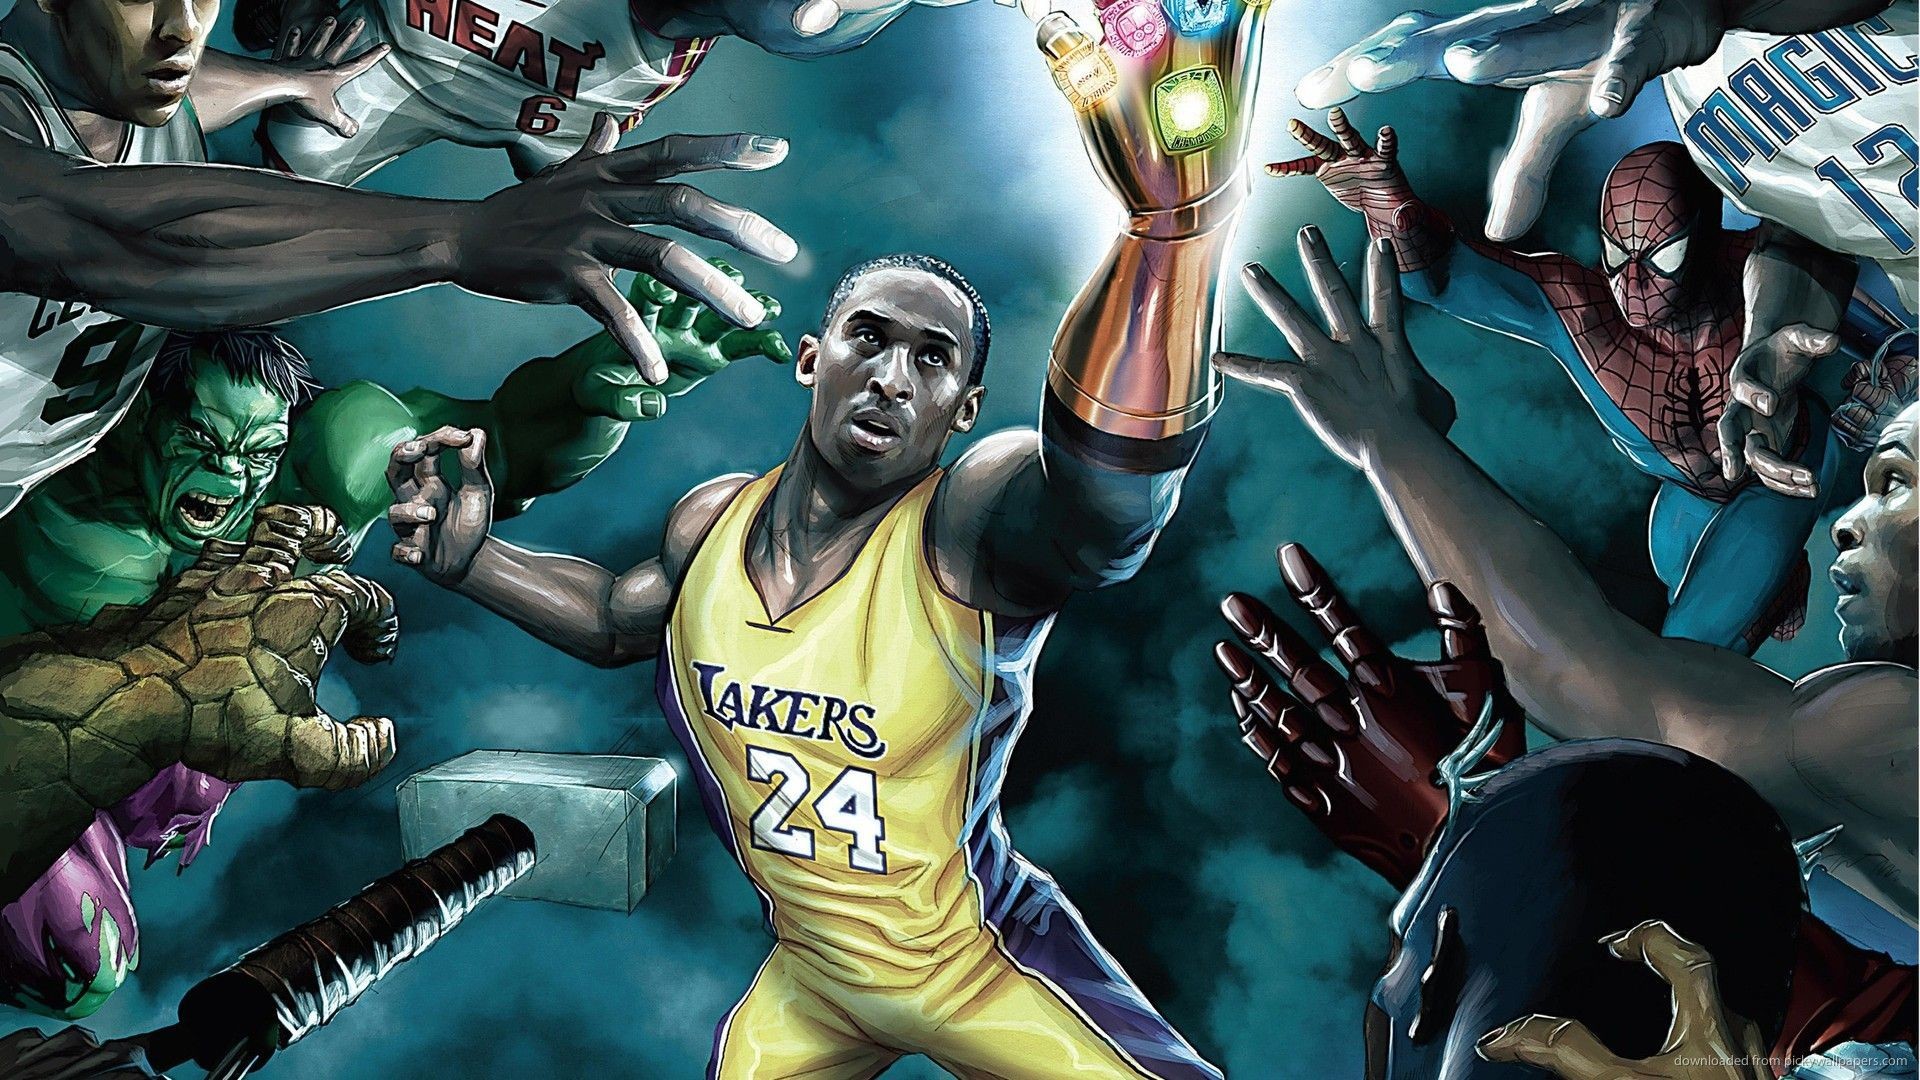 1920x1080 'power moves' featuring basketball players, kobe bryant & lebron james &  marvel super heroes by greg horn